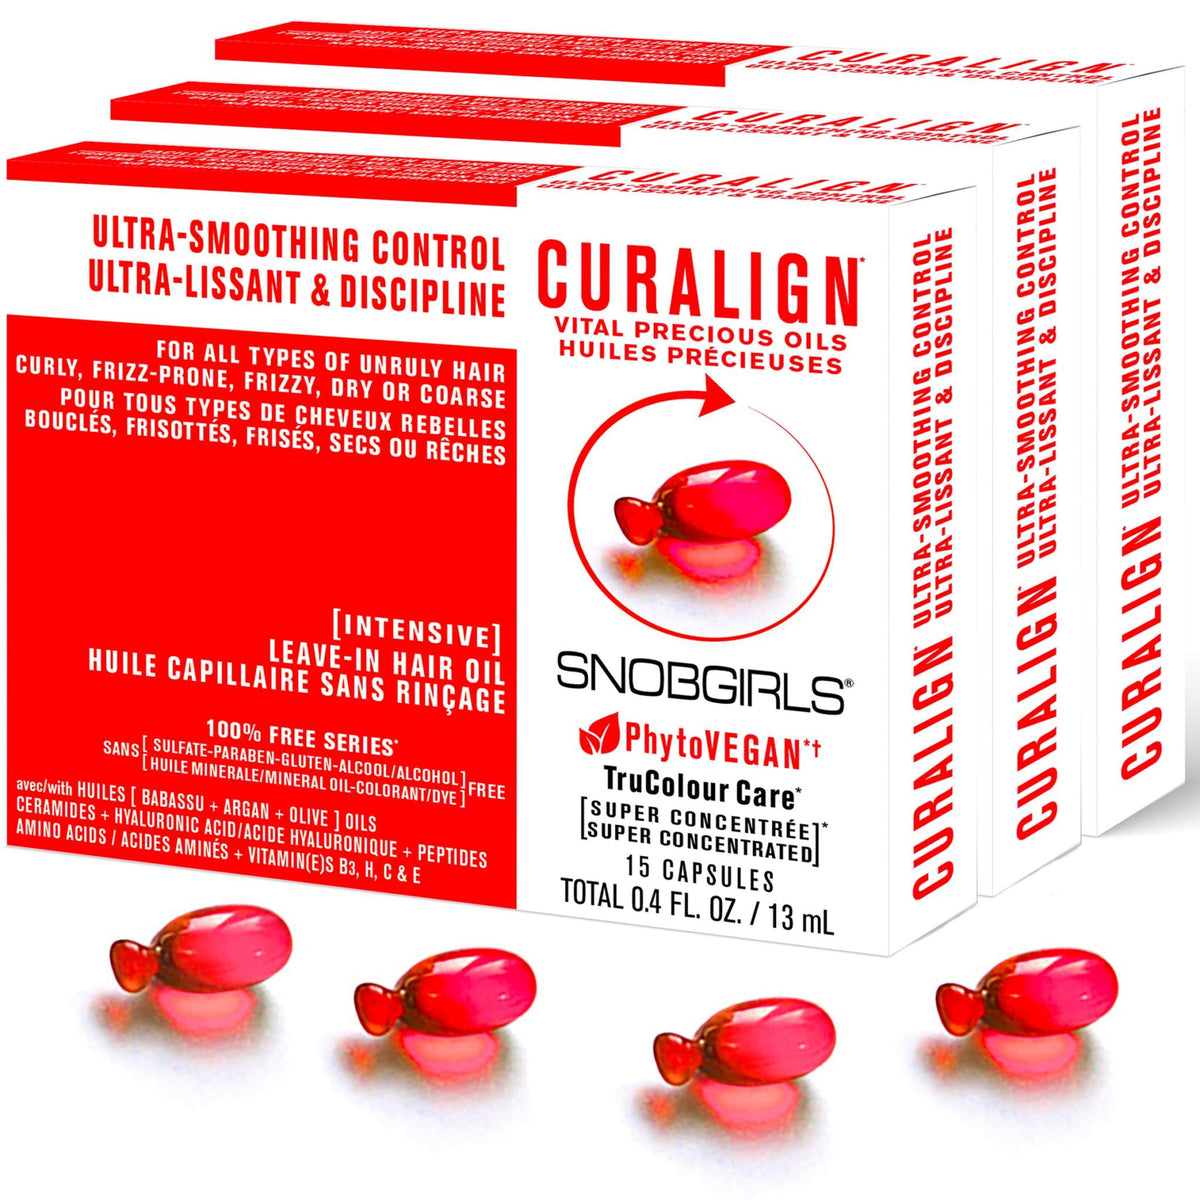 CURALIGN Salon Vegan Hair Oil for Ultra-Smoothing Control 45 Capsules